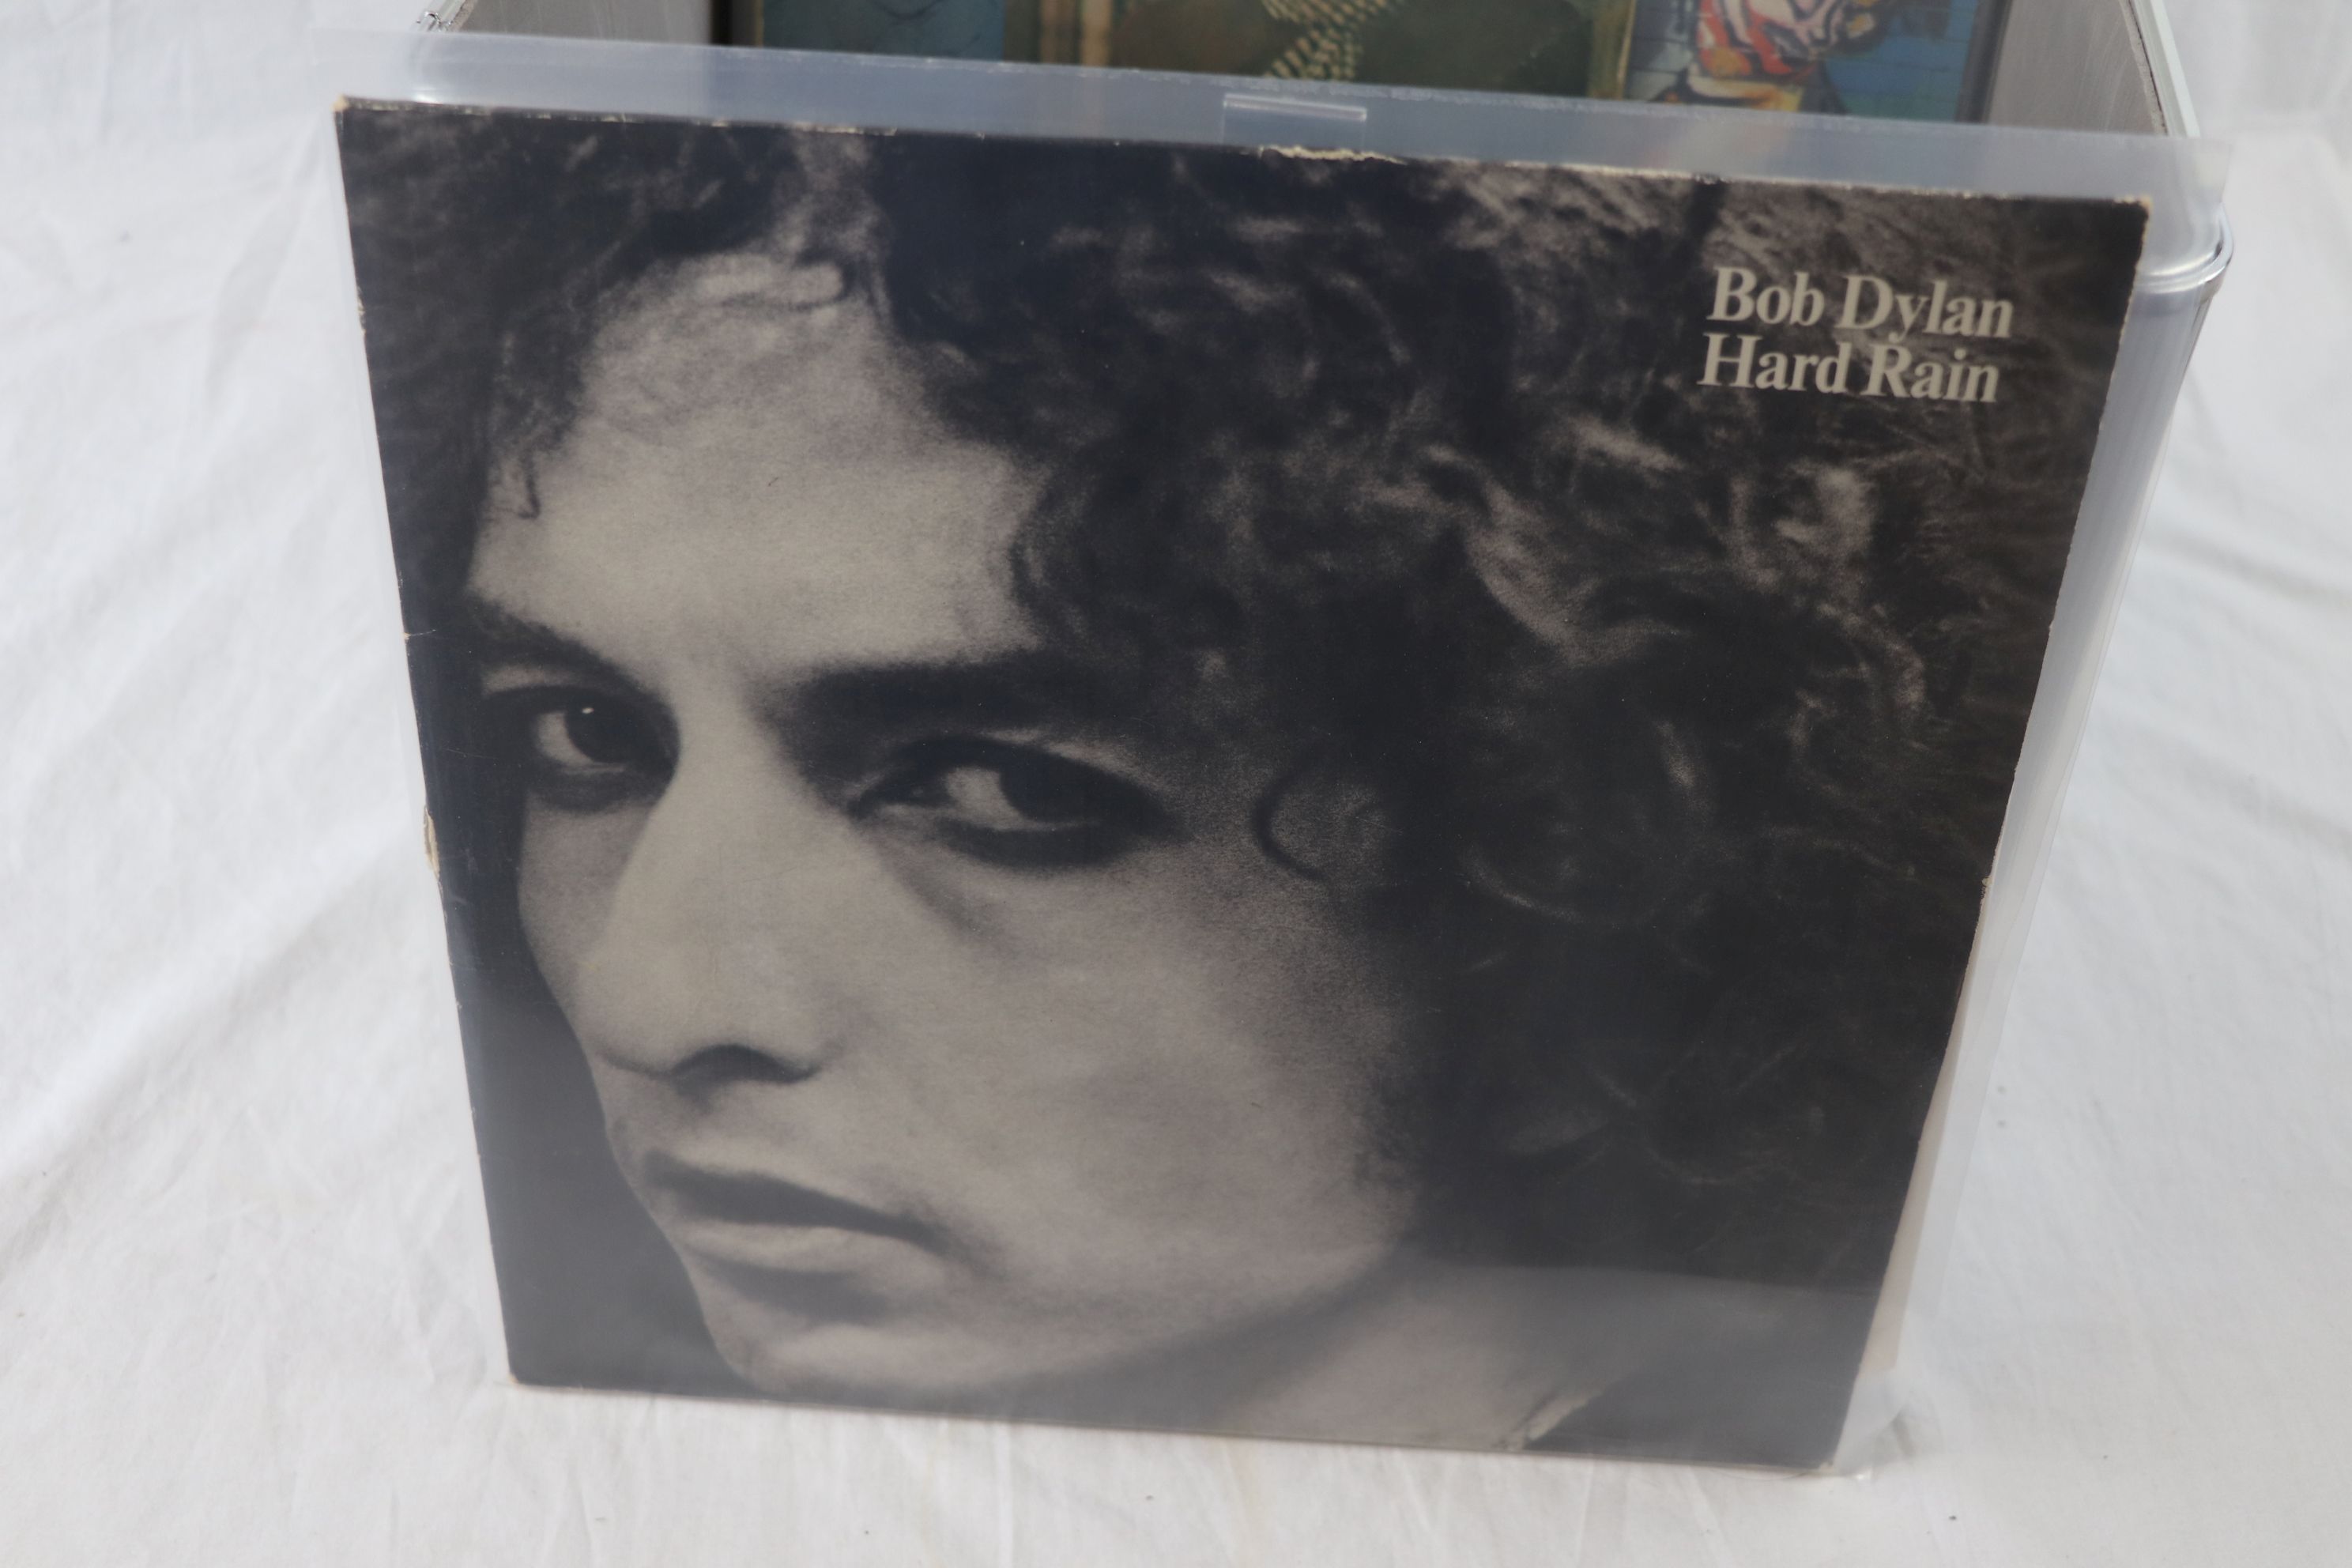 Vinyl - Collection of over 25 Bob Dylan LPs from The Times They Are a Changing through to Bob - Image 2 of 11